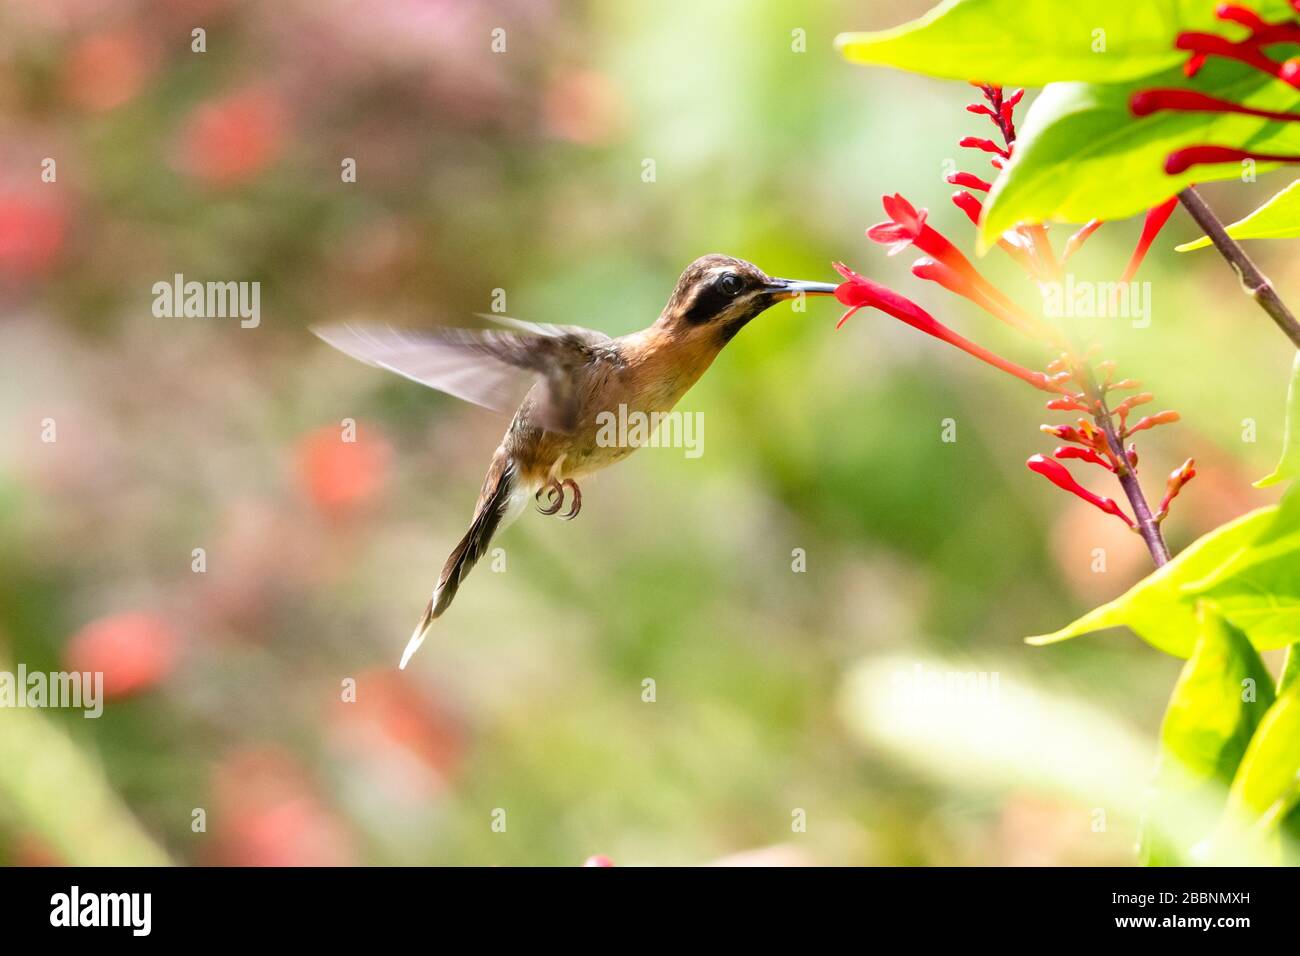 A Little Hermit hummingbird feeding on red tubular flowers with a flowerbed blurred in the background. Stock Photo